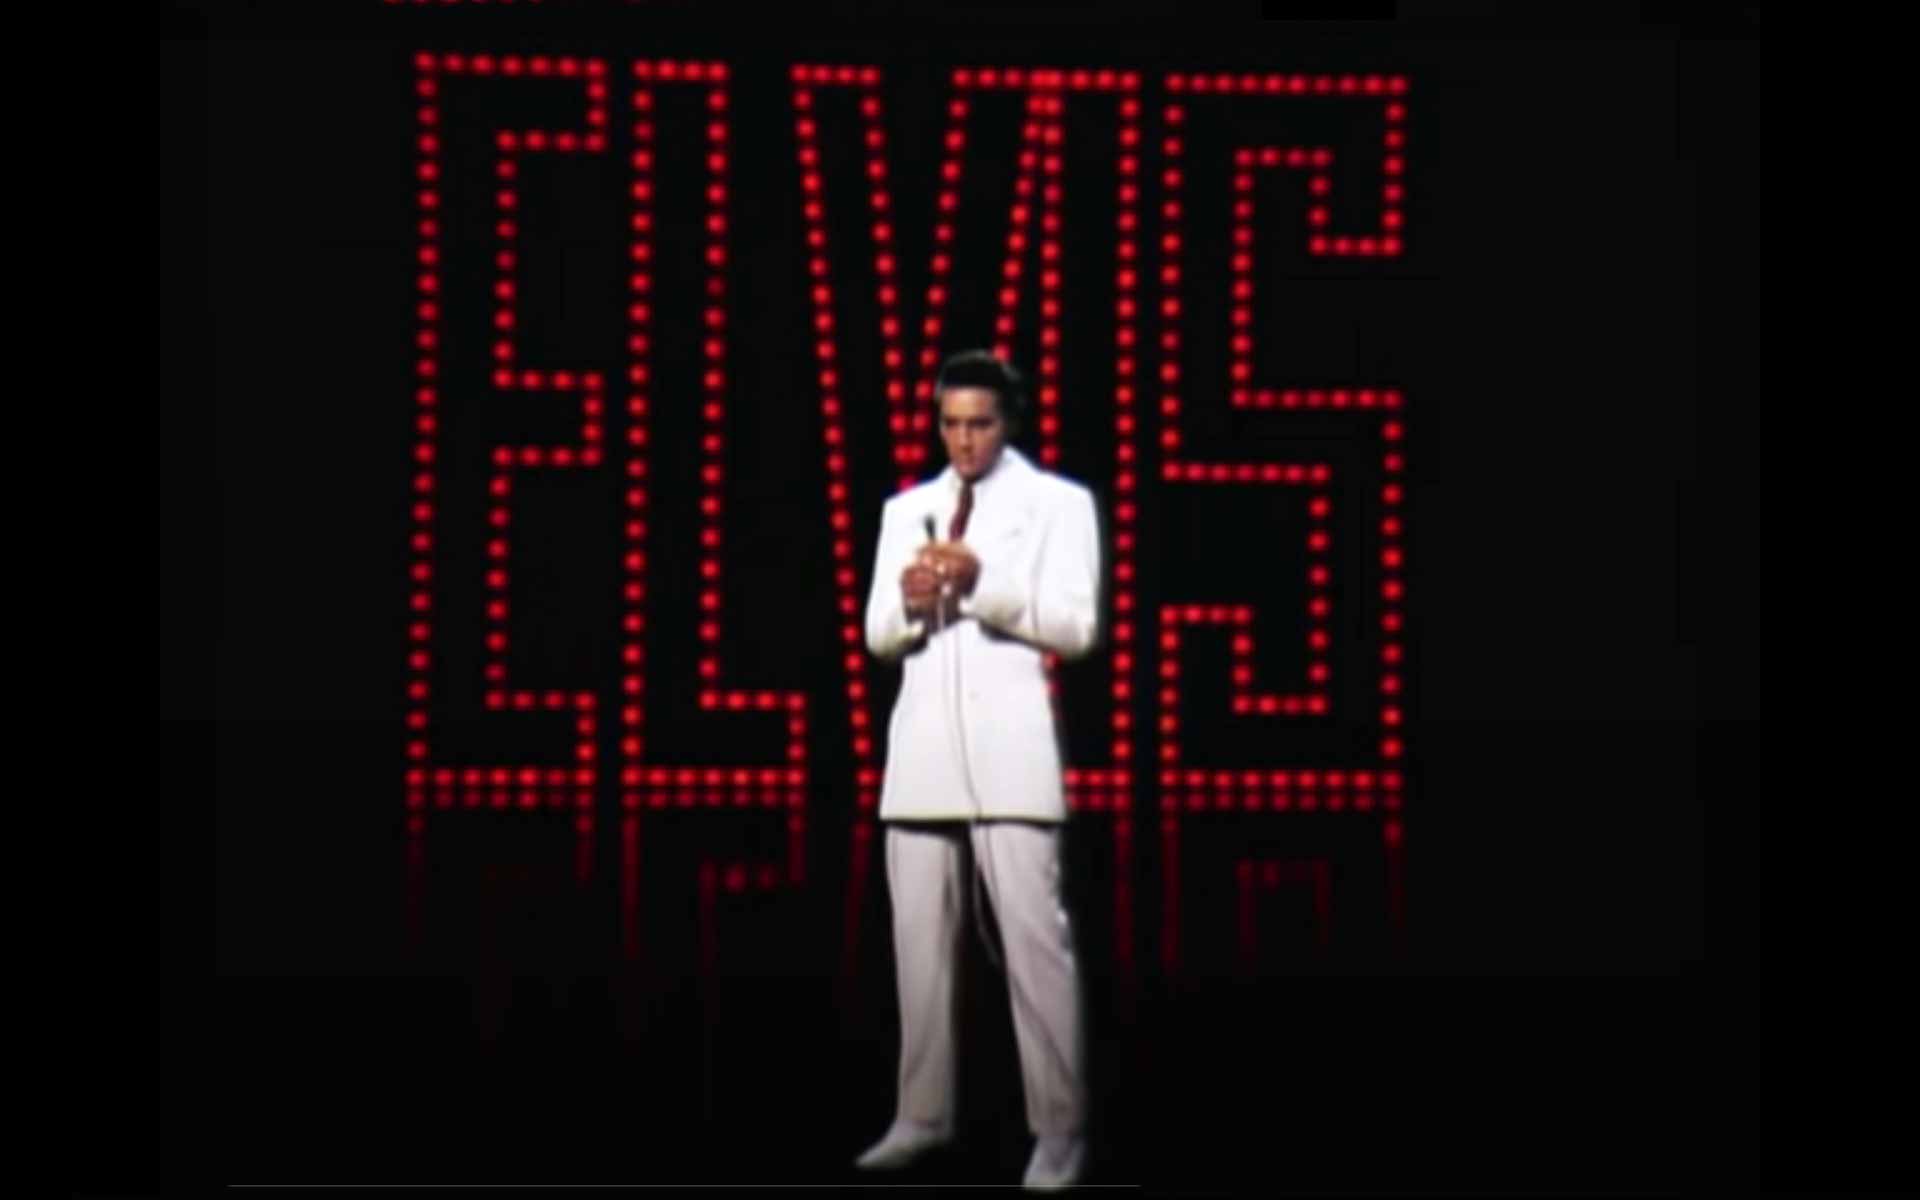 Elvis Presley - If I Can Dream ('68 Comeback Special) 